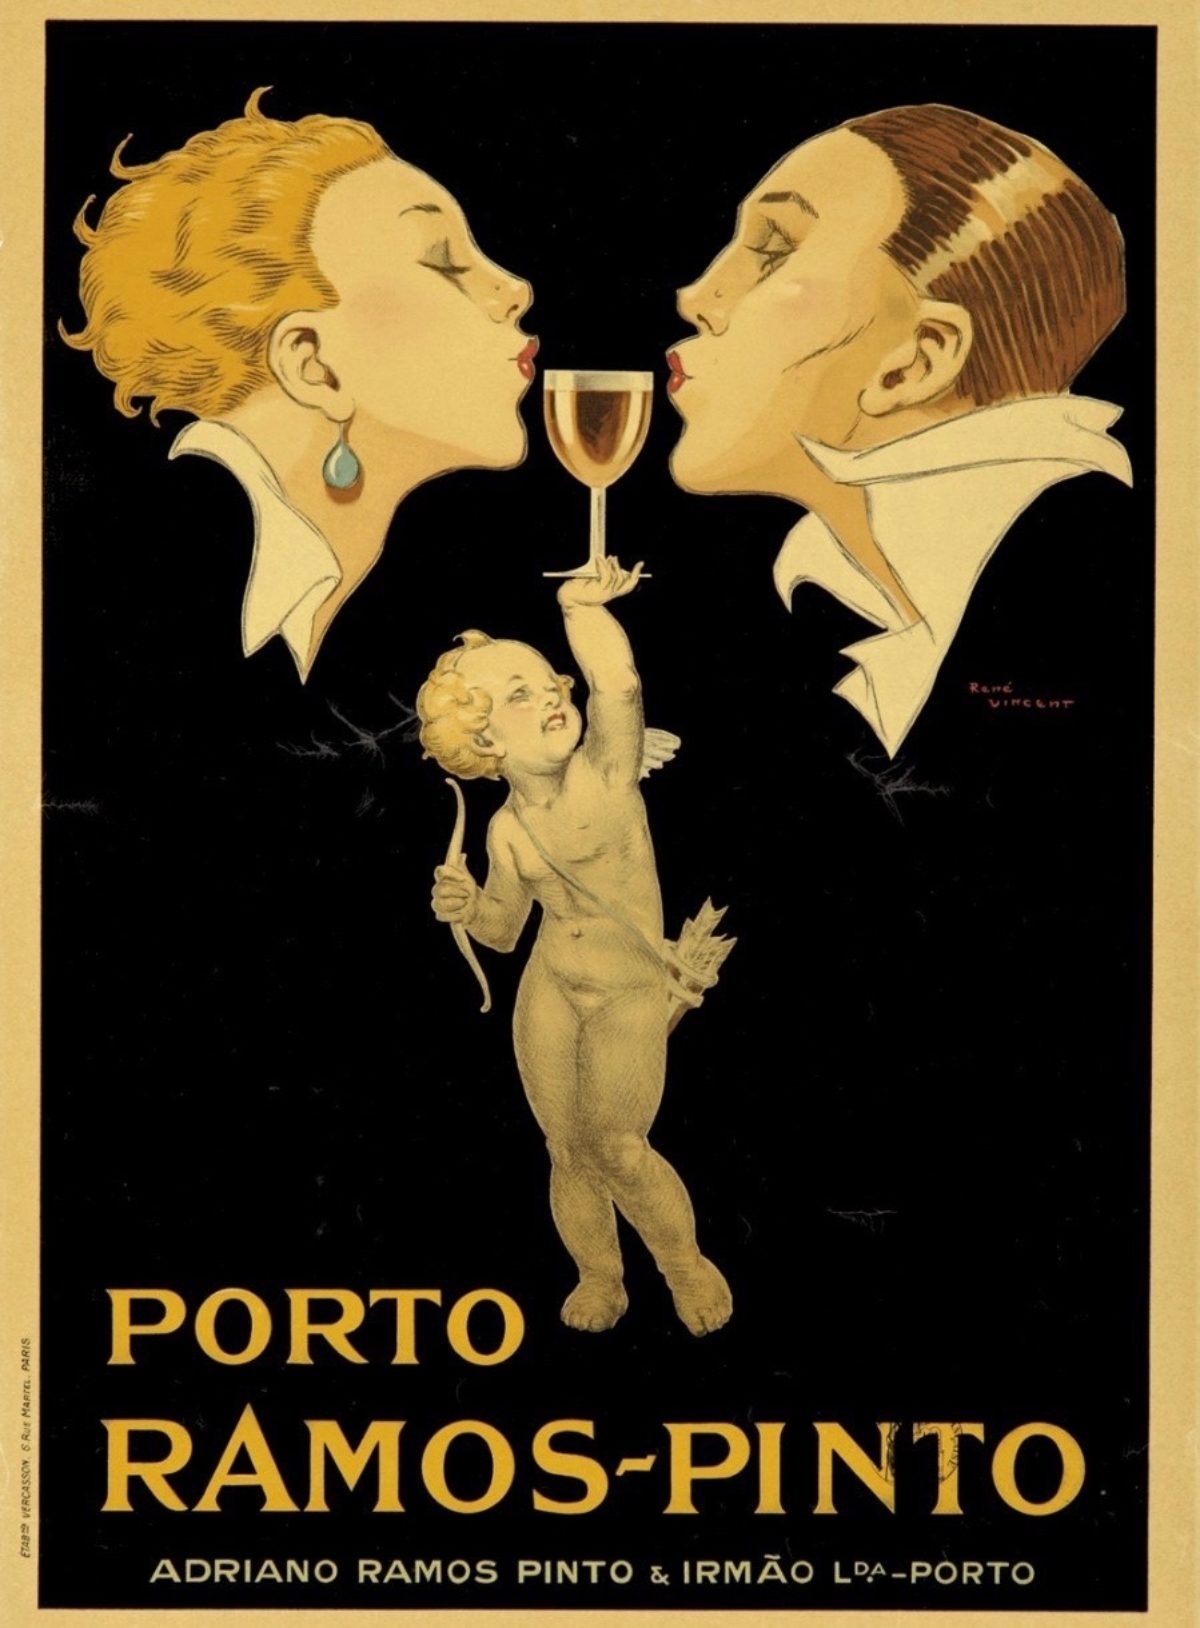 A poster of 2 profile figures that are pursing their lips towards a cup that a cherub statue is holding.